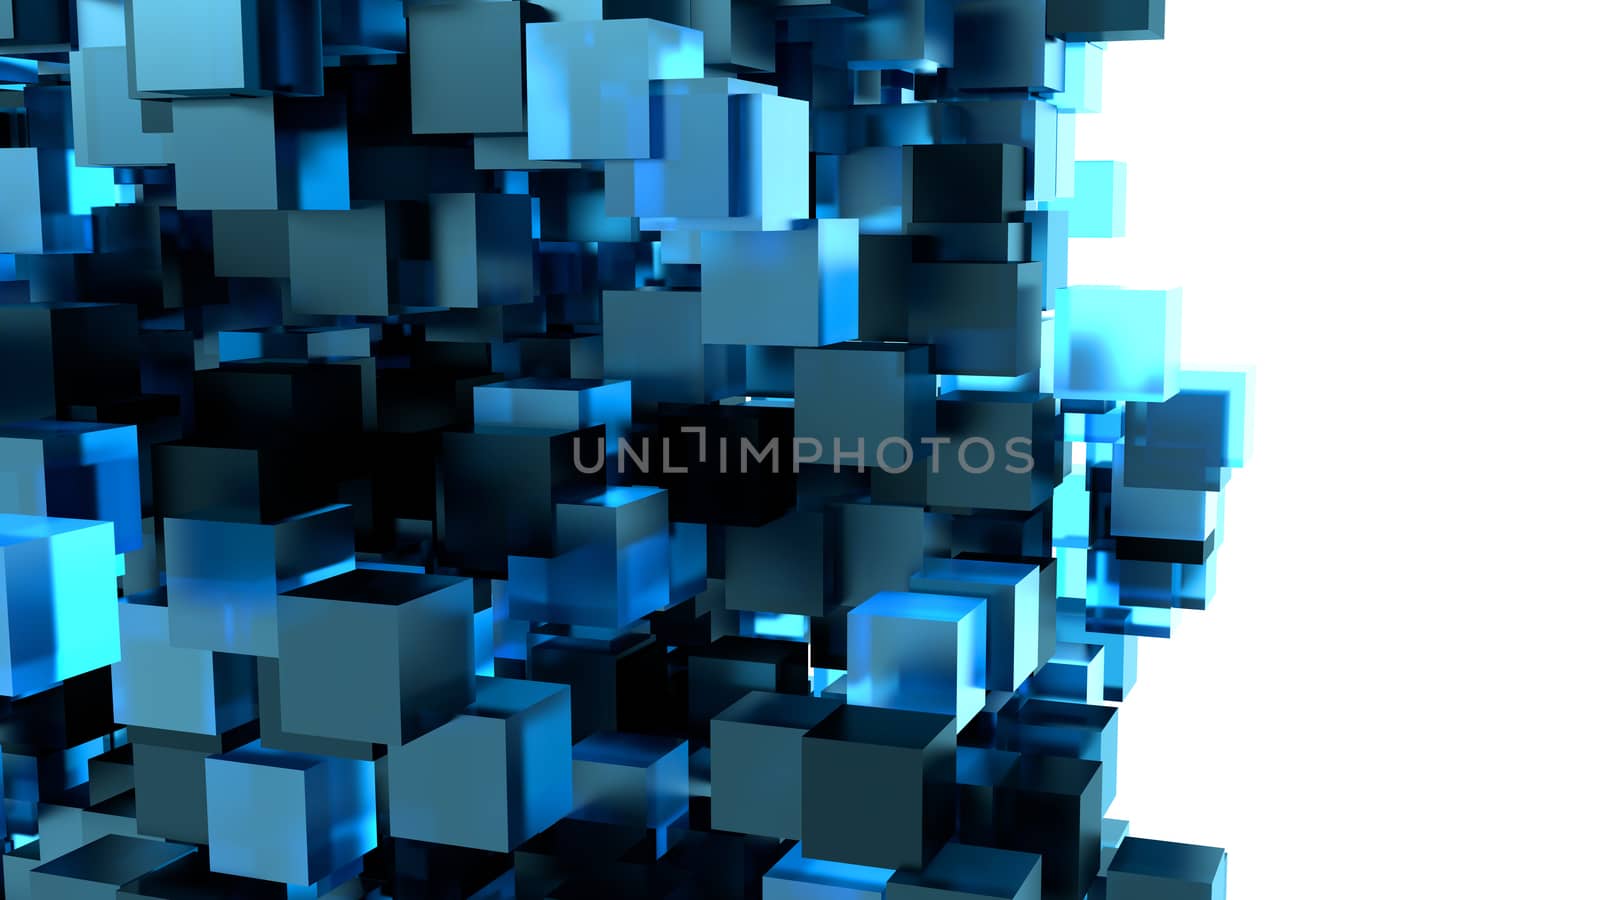 A Blue Cubes Abstract Background For Your Design. White Background And Transparent Cubes. 3D Illustration